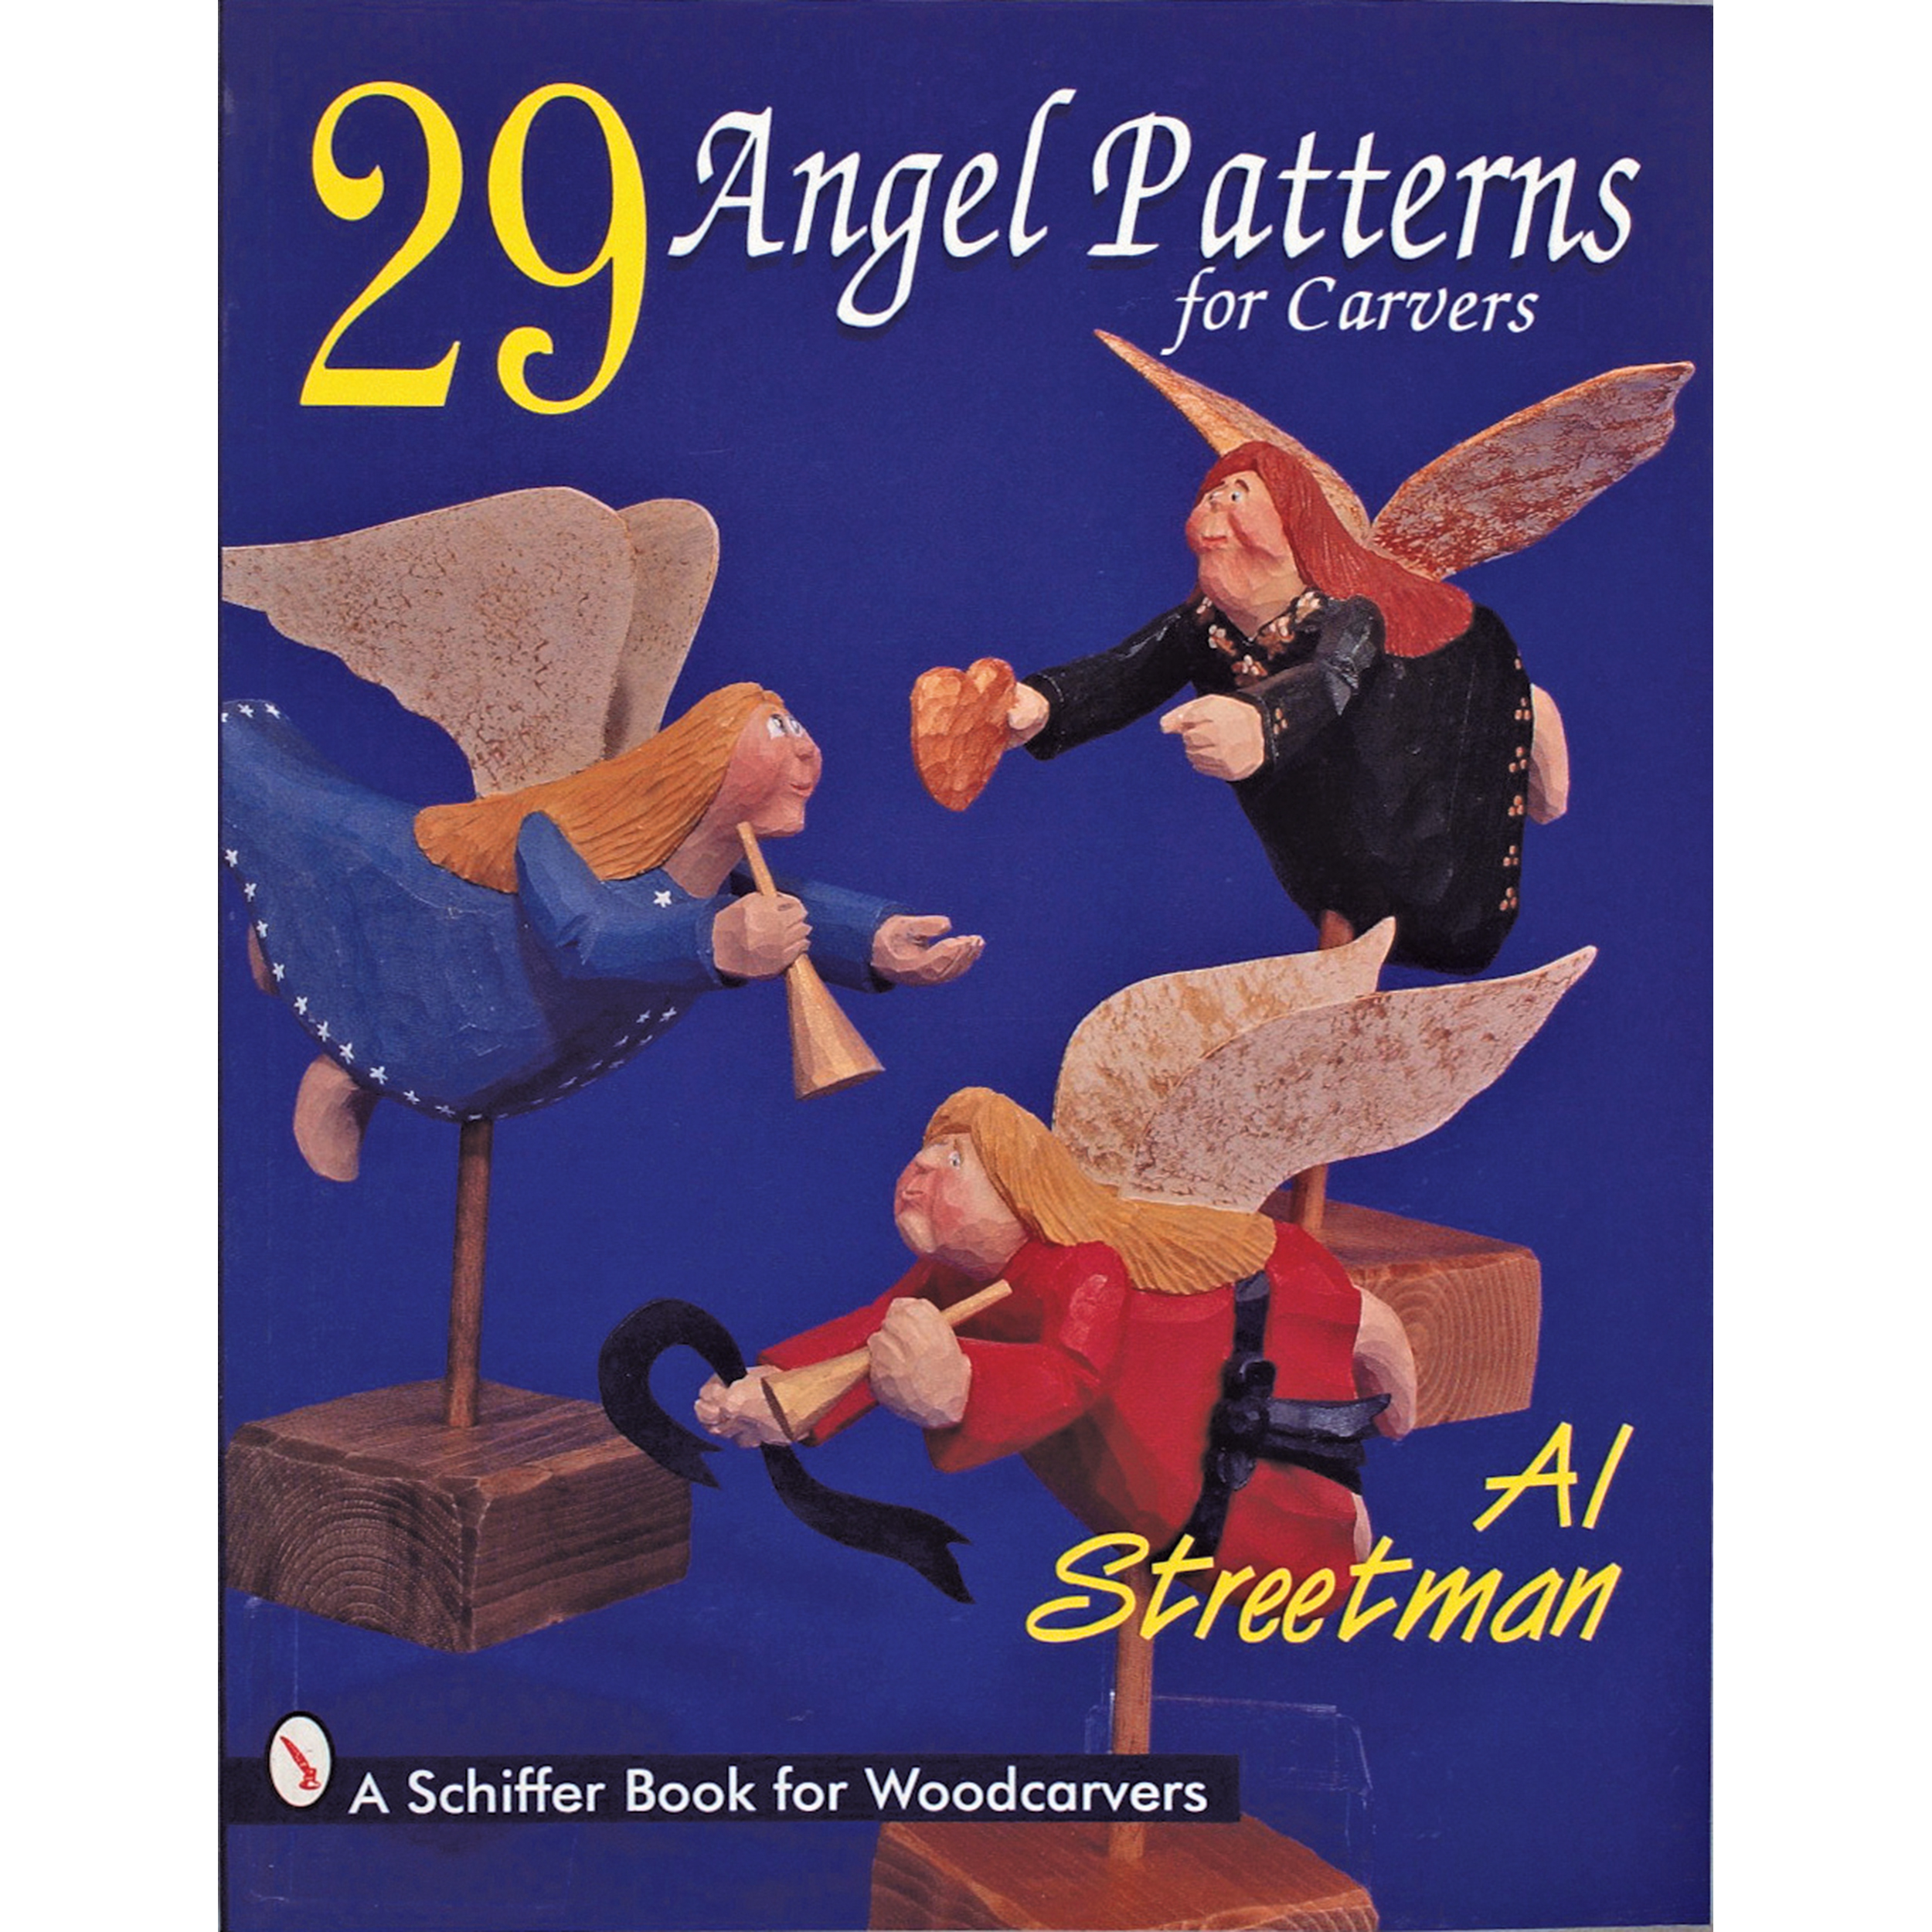 29 Angel Patterns For Carvers